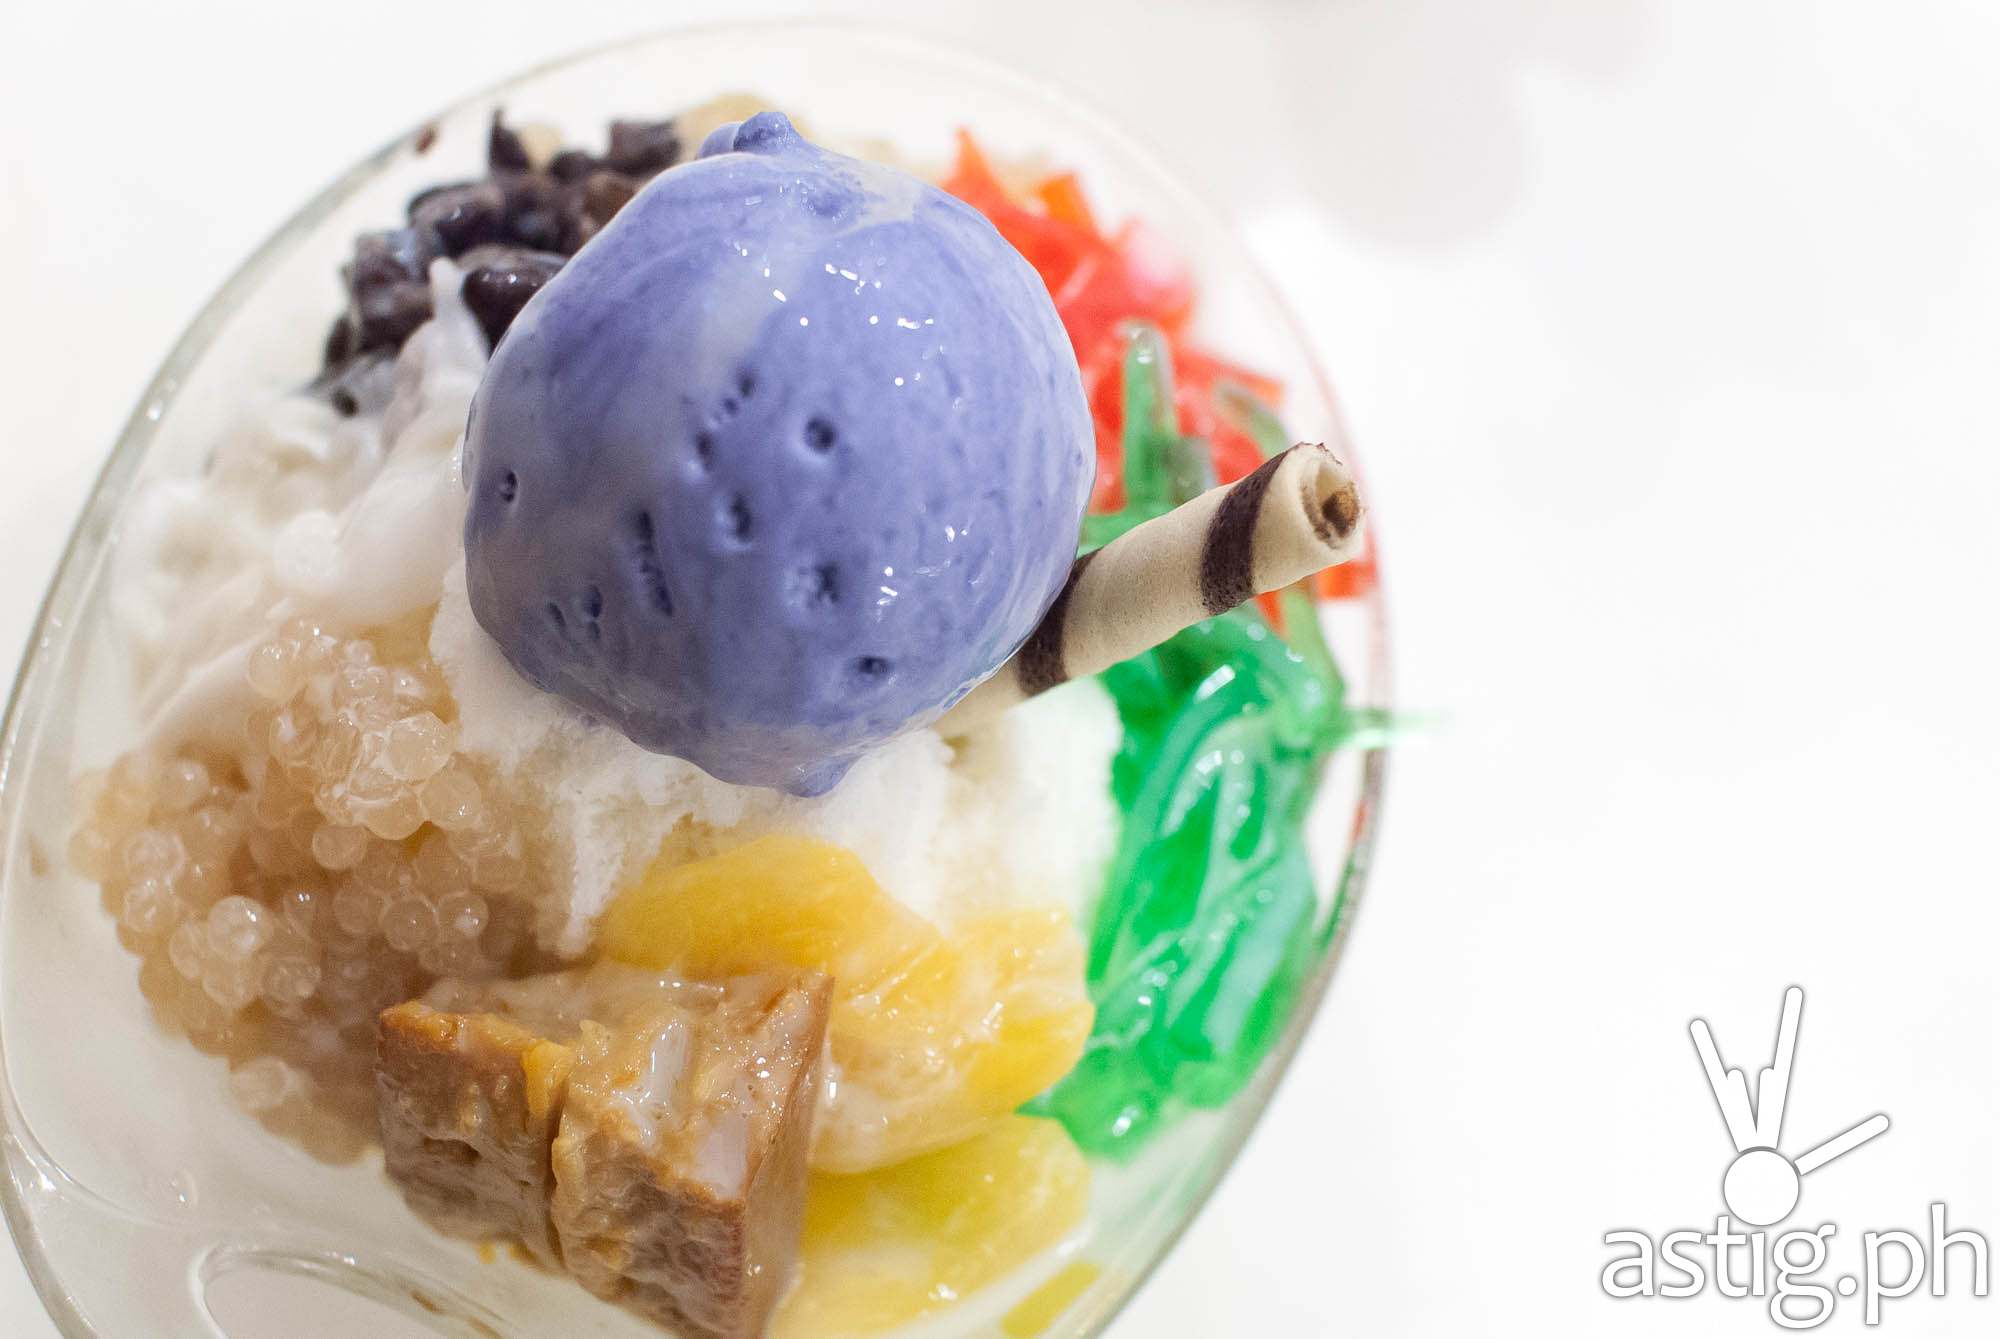 Filipino Halo-halo - Let's Chow Rice and Noodle Haus restaurant Makati Cinema Square